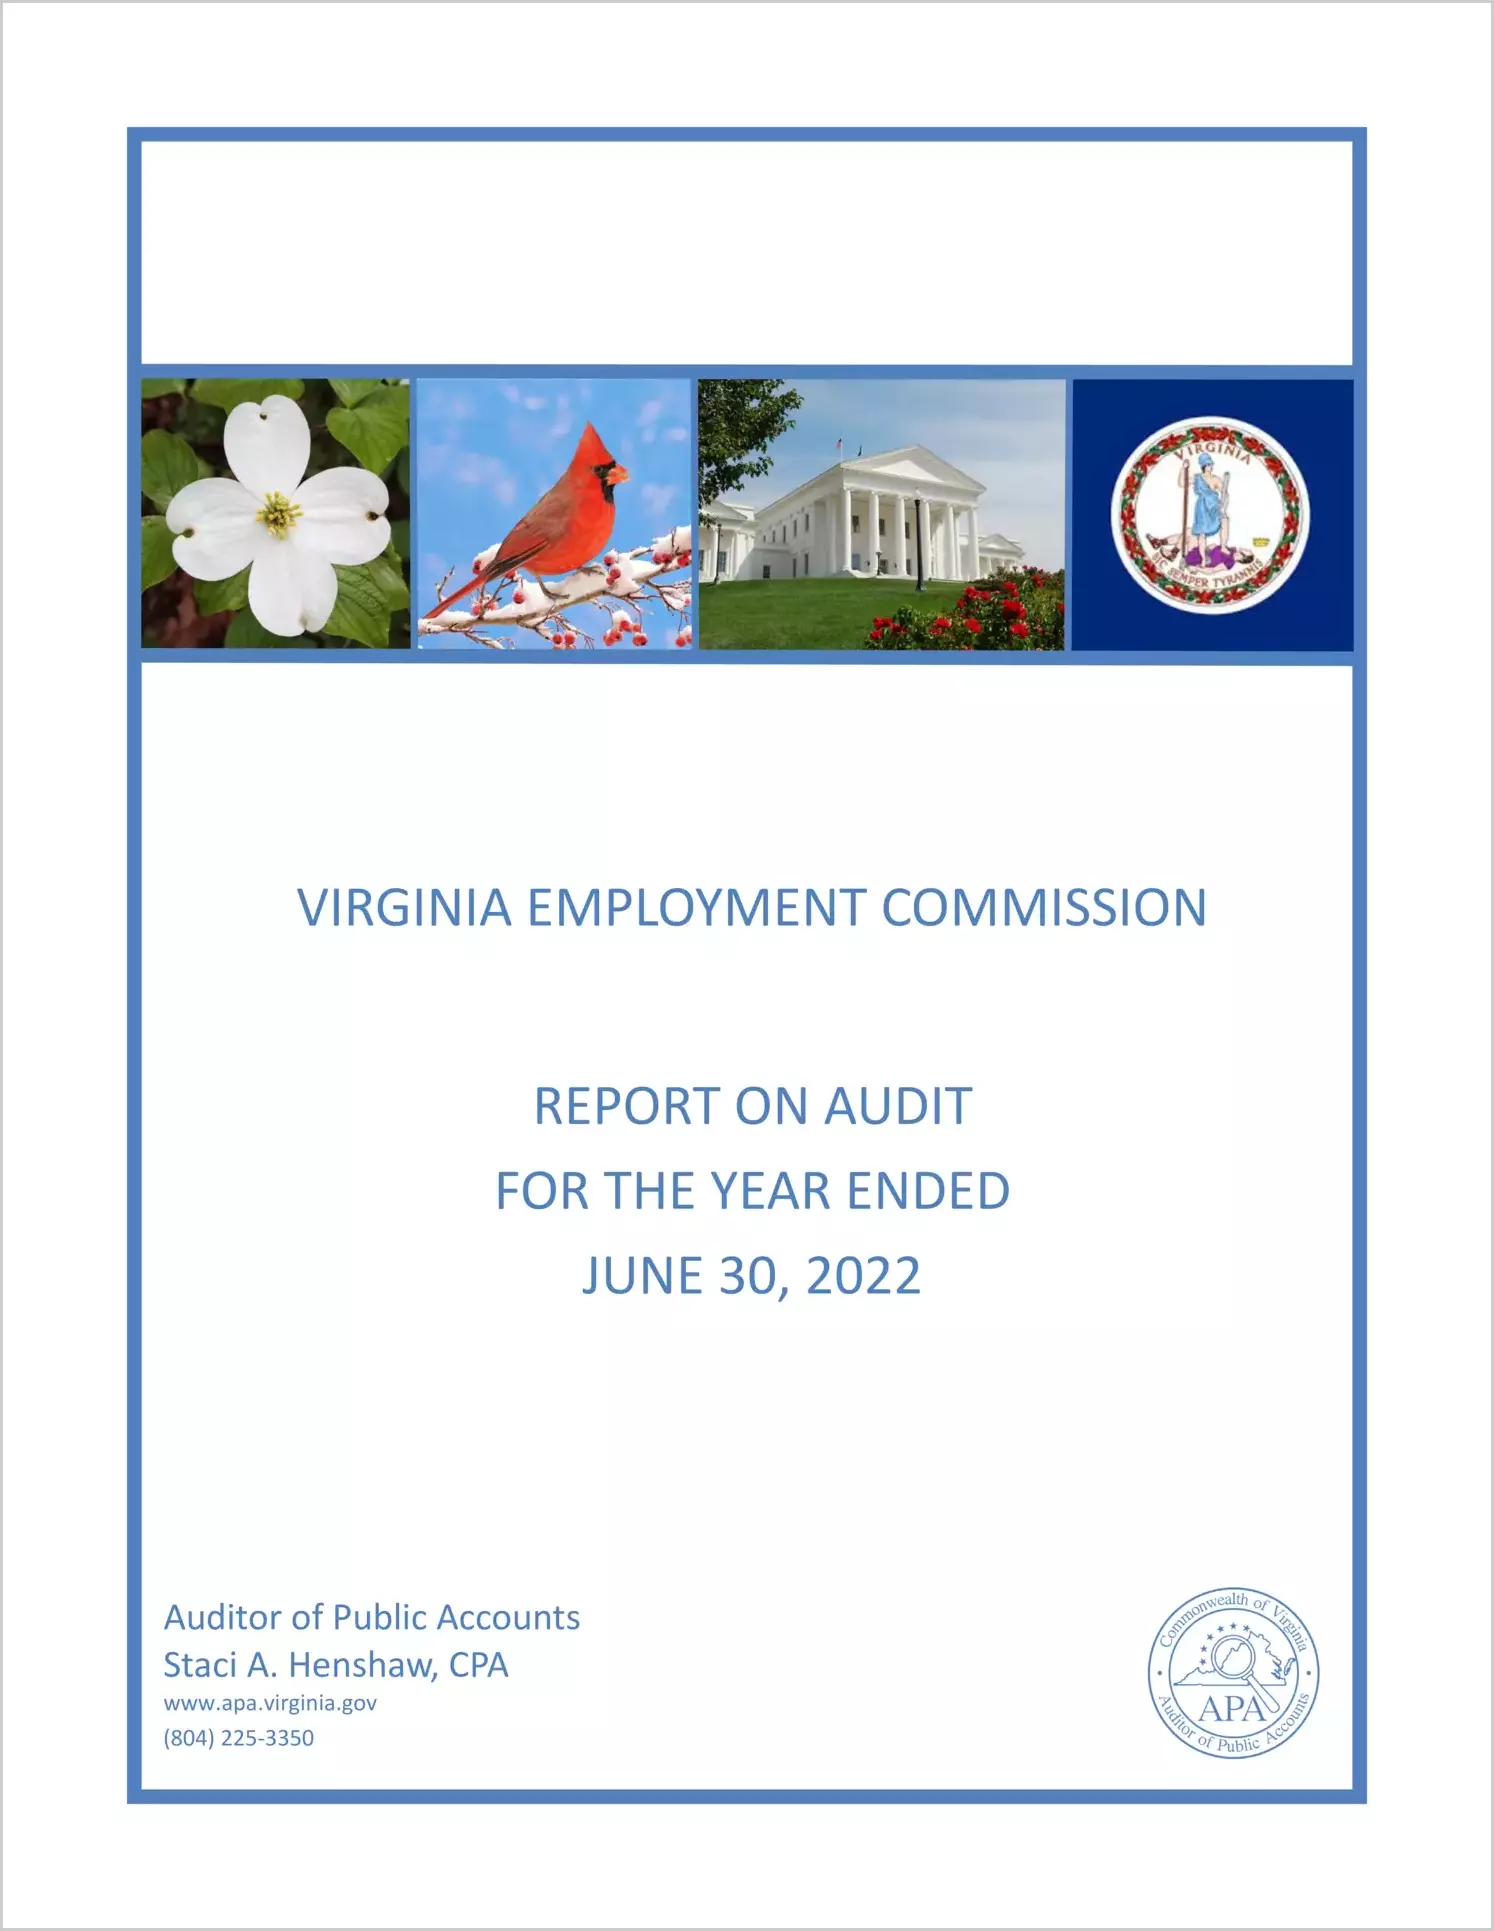 Virginia Employment Commission for the year ended June 30, 2022